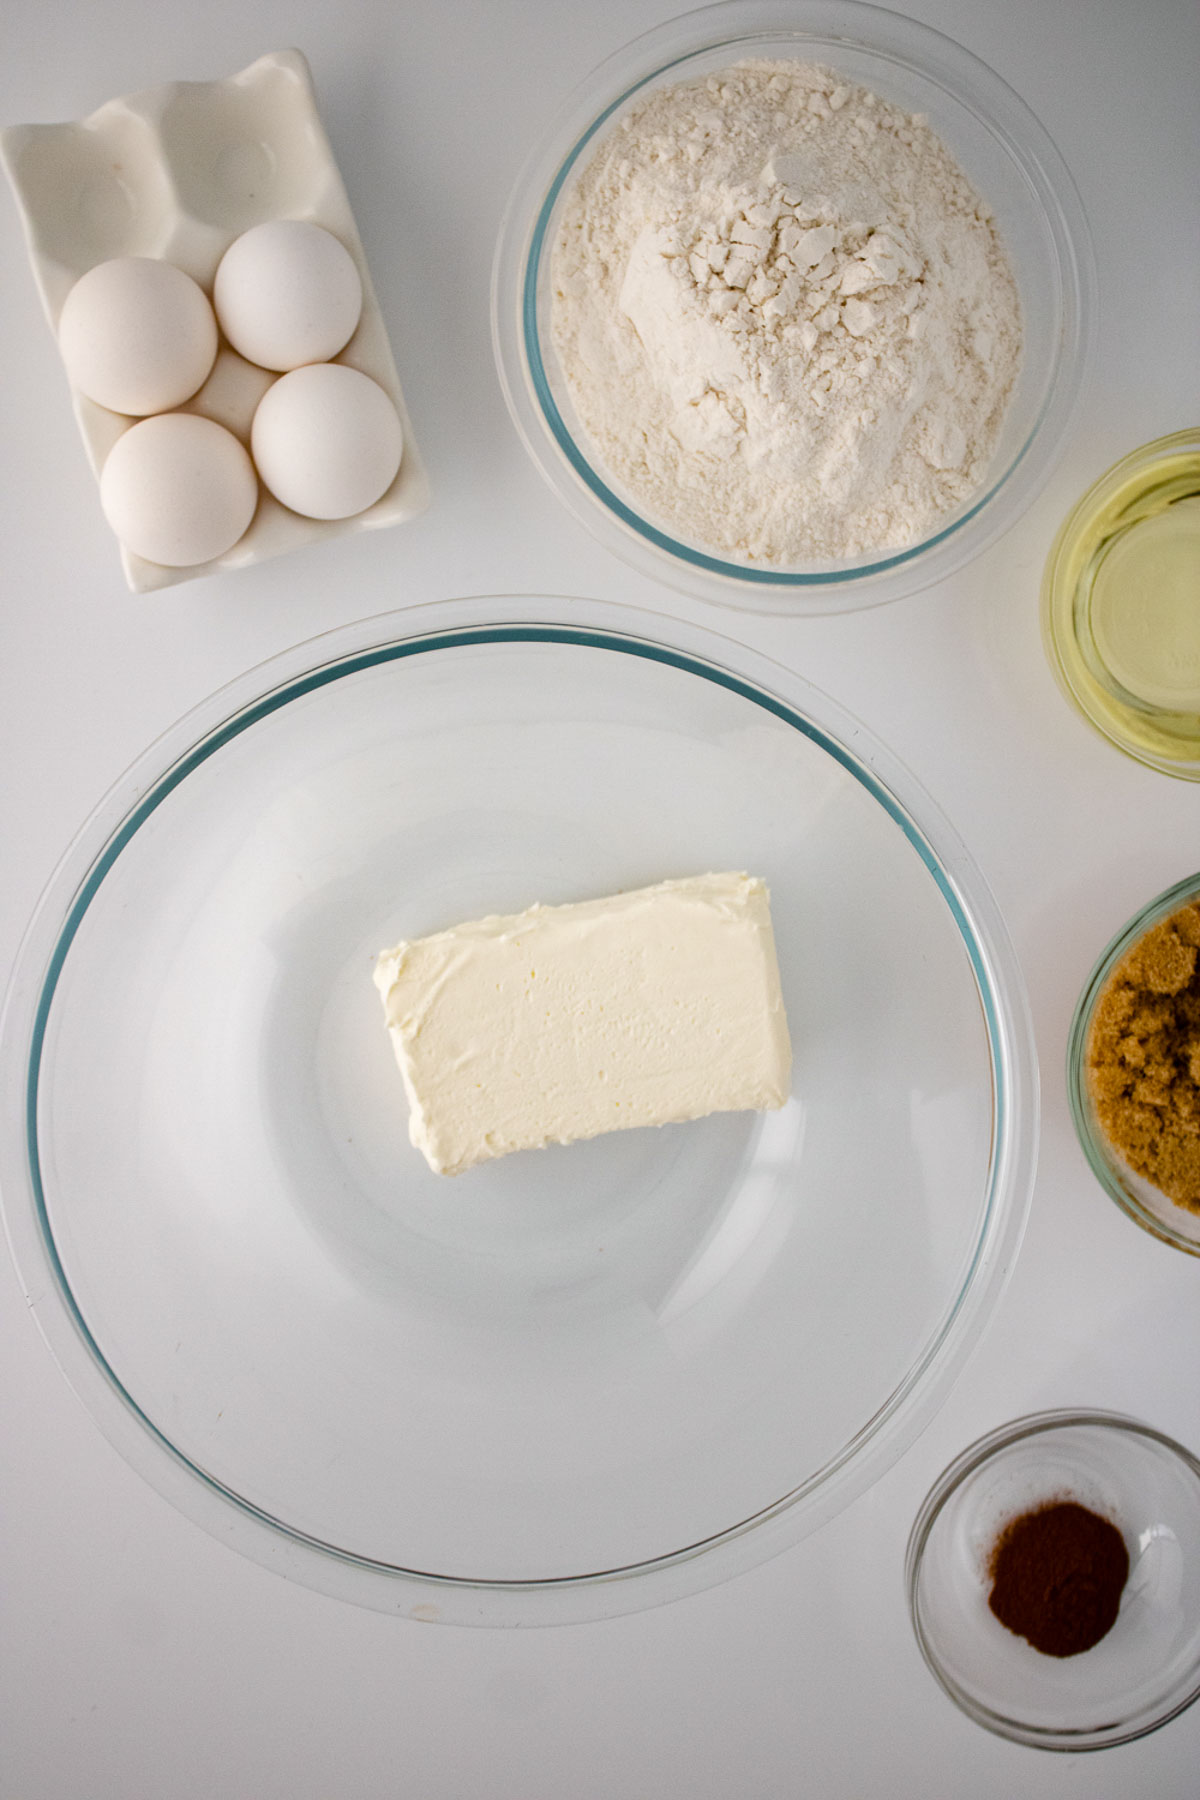 Top-down view of dessert baking ingredients on a white surface, including eggs, flour, butter, sugar, and cinnamon in separate bowls.